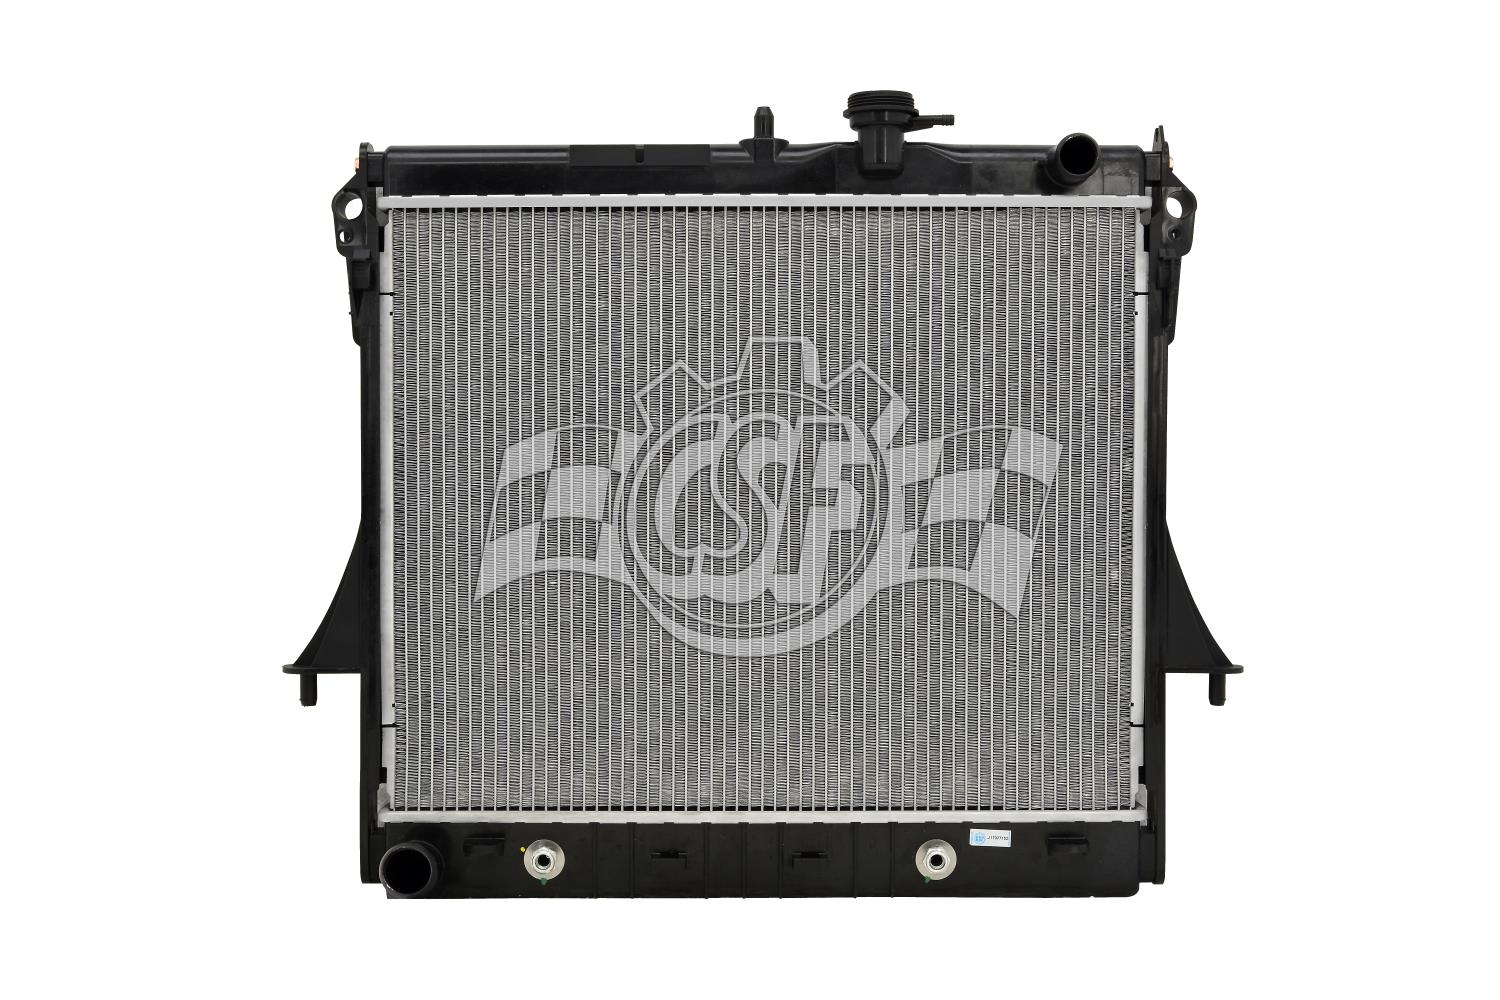 OE-Style 1-Row Radiator, Hummer H3, Hummer H3T, Chevy Colorado, GMC Canyon